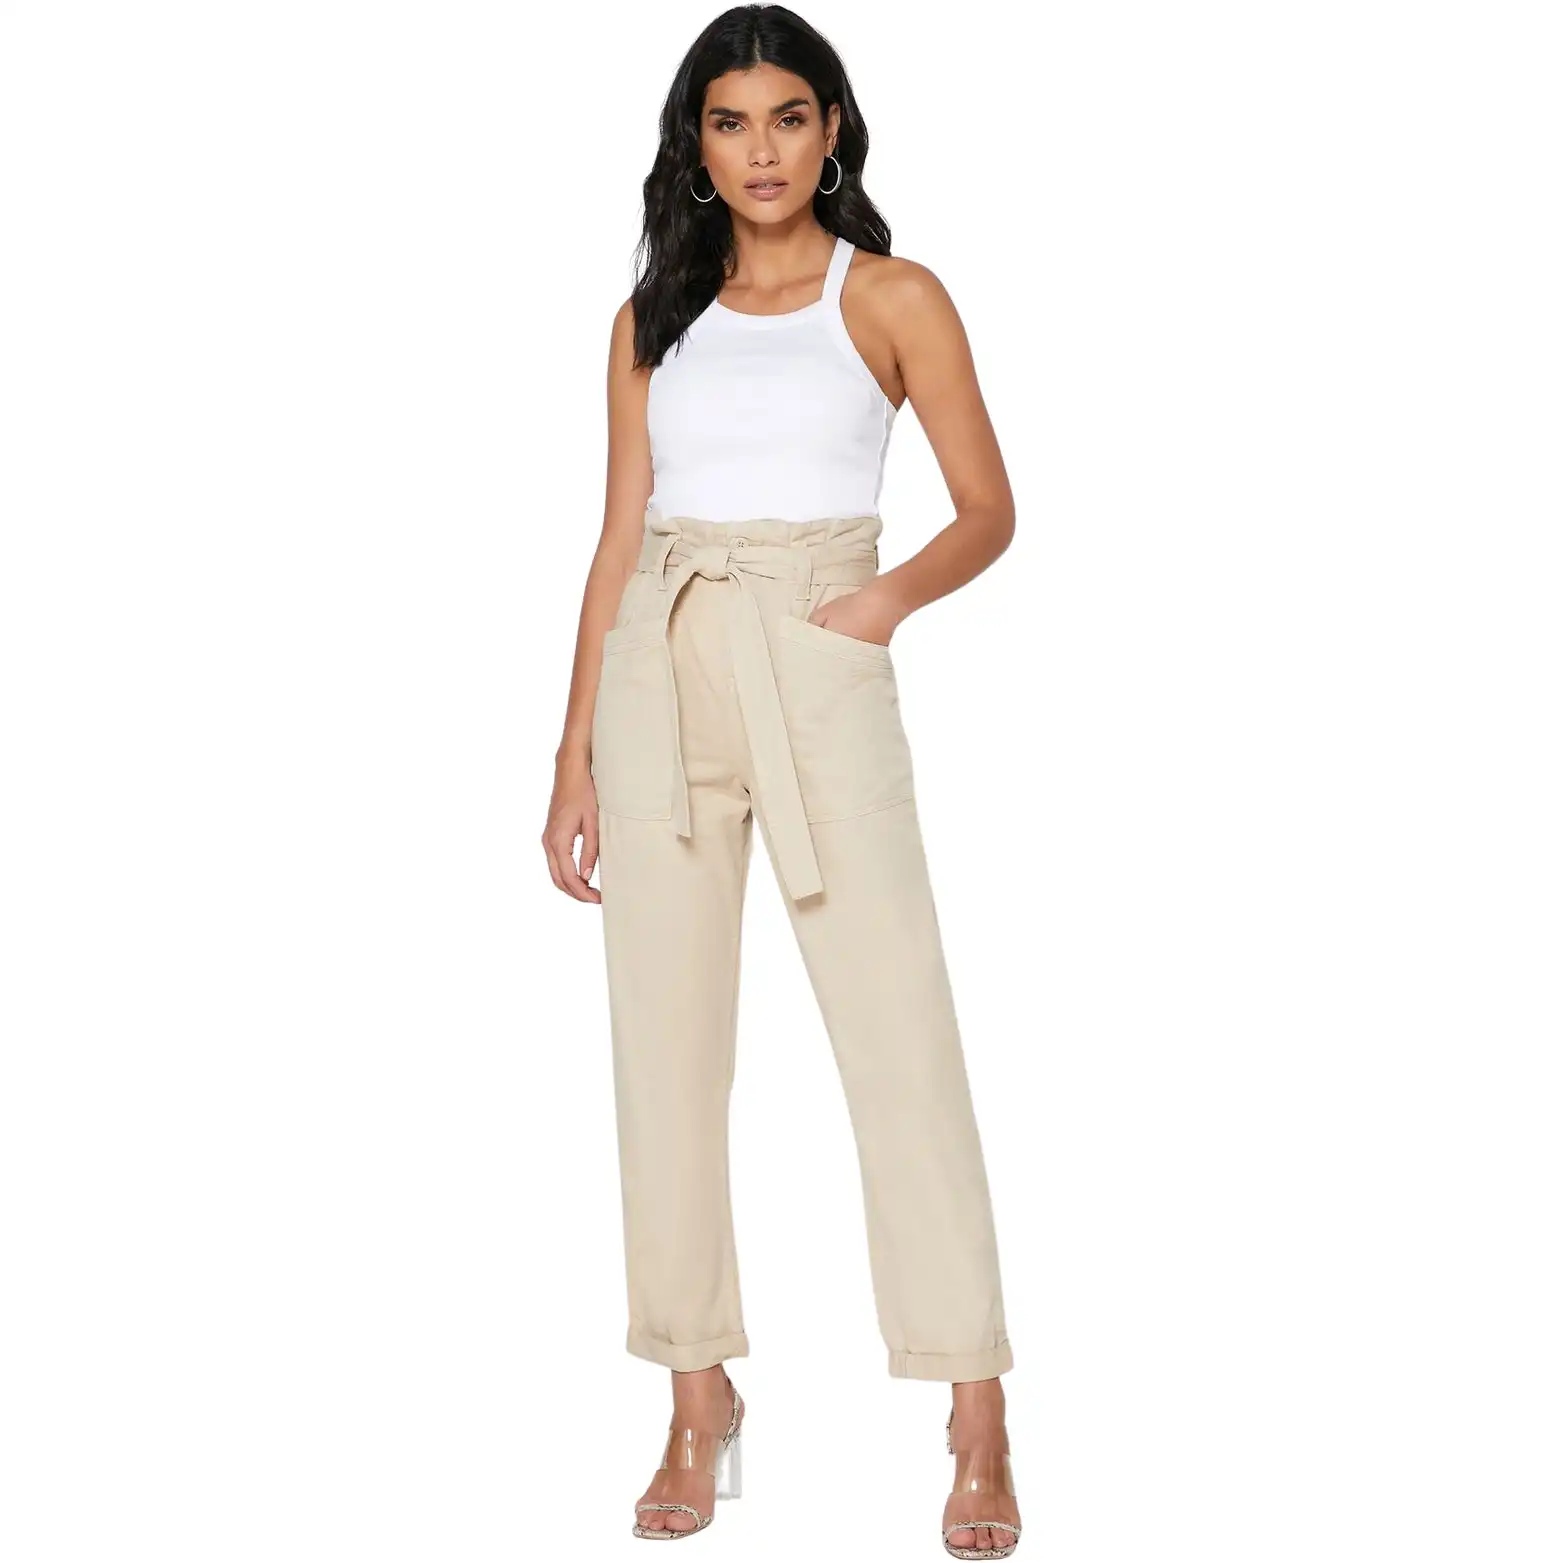 Topshop Women's Paperbag Trousers - Taupe/Beige